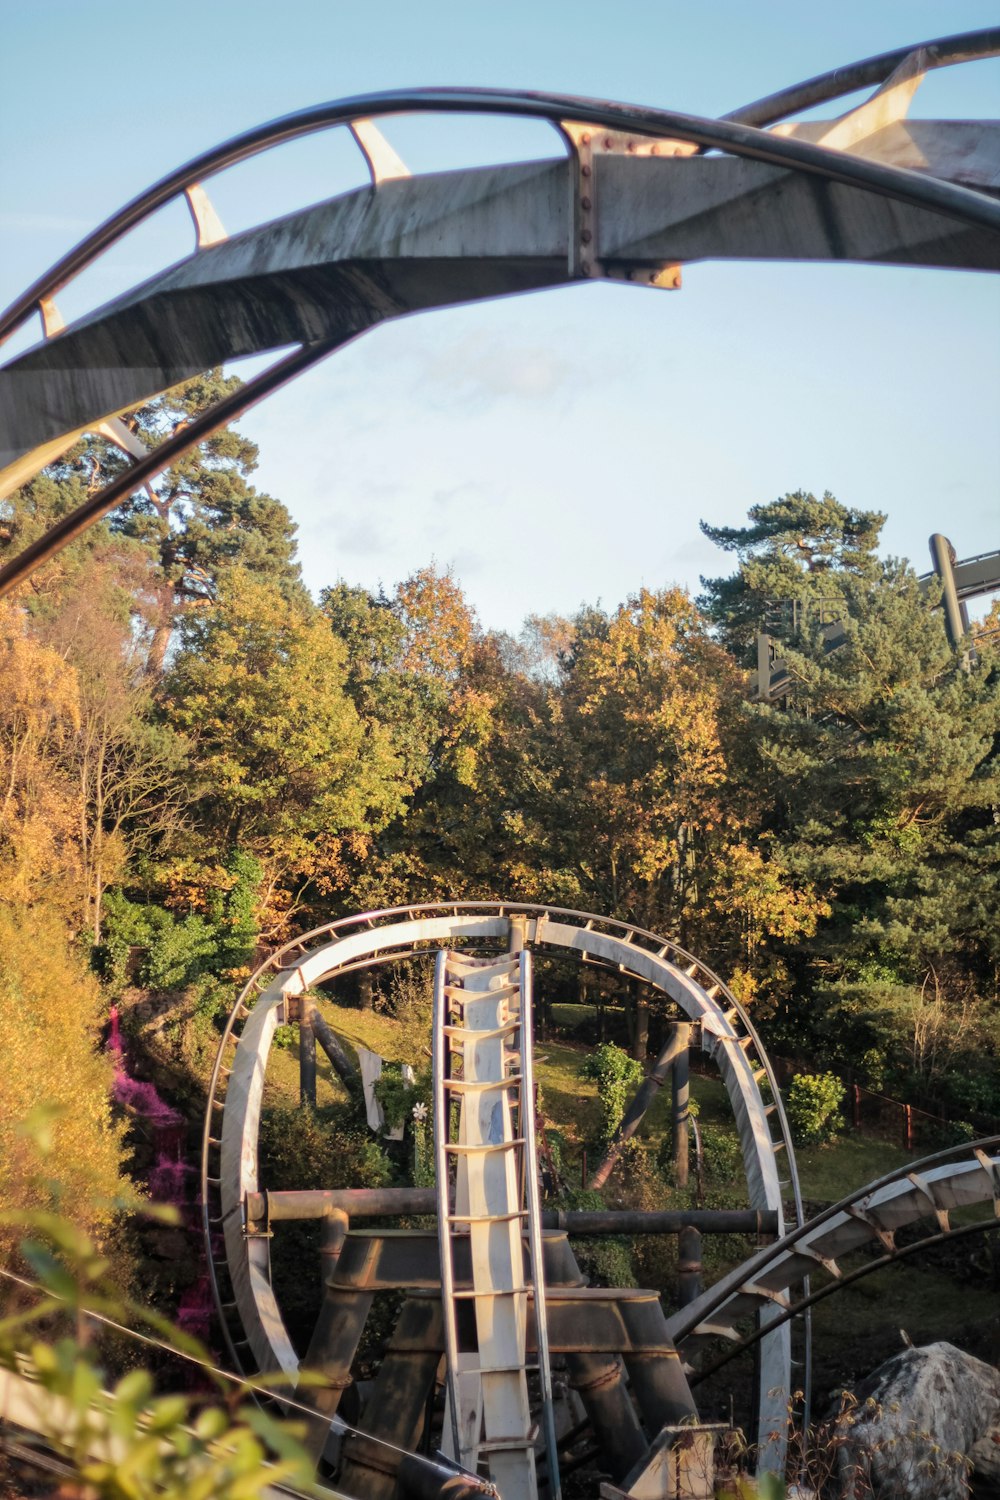 a roller coaster in the middle of a wooded area